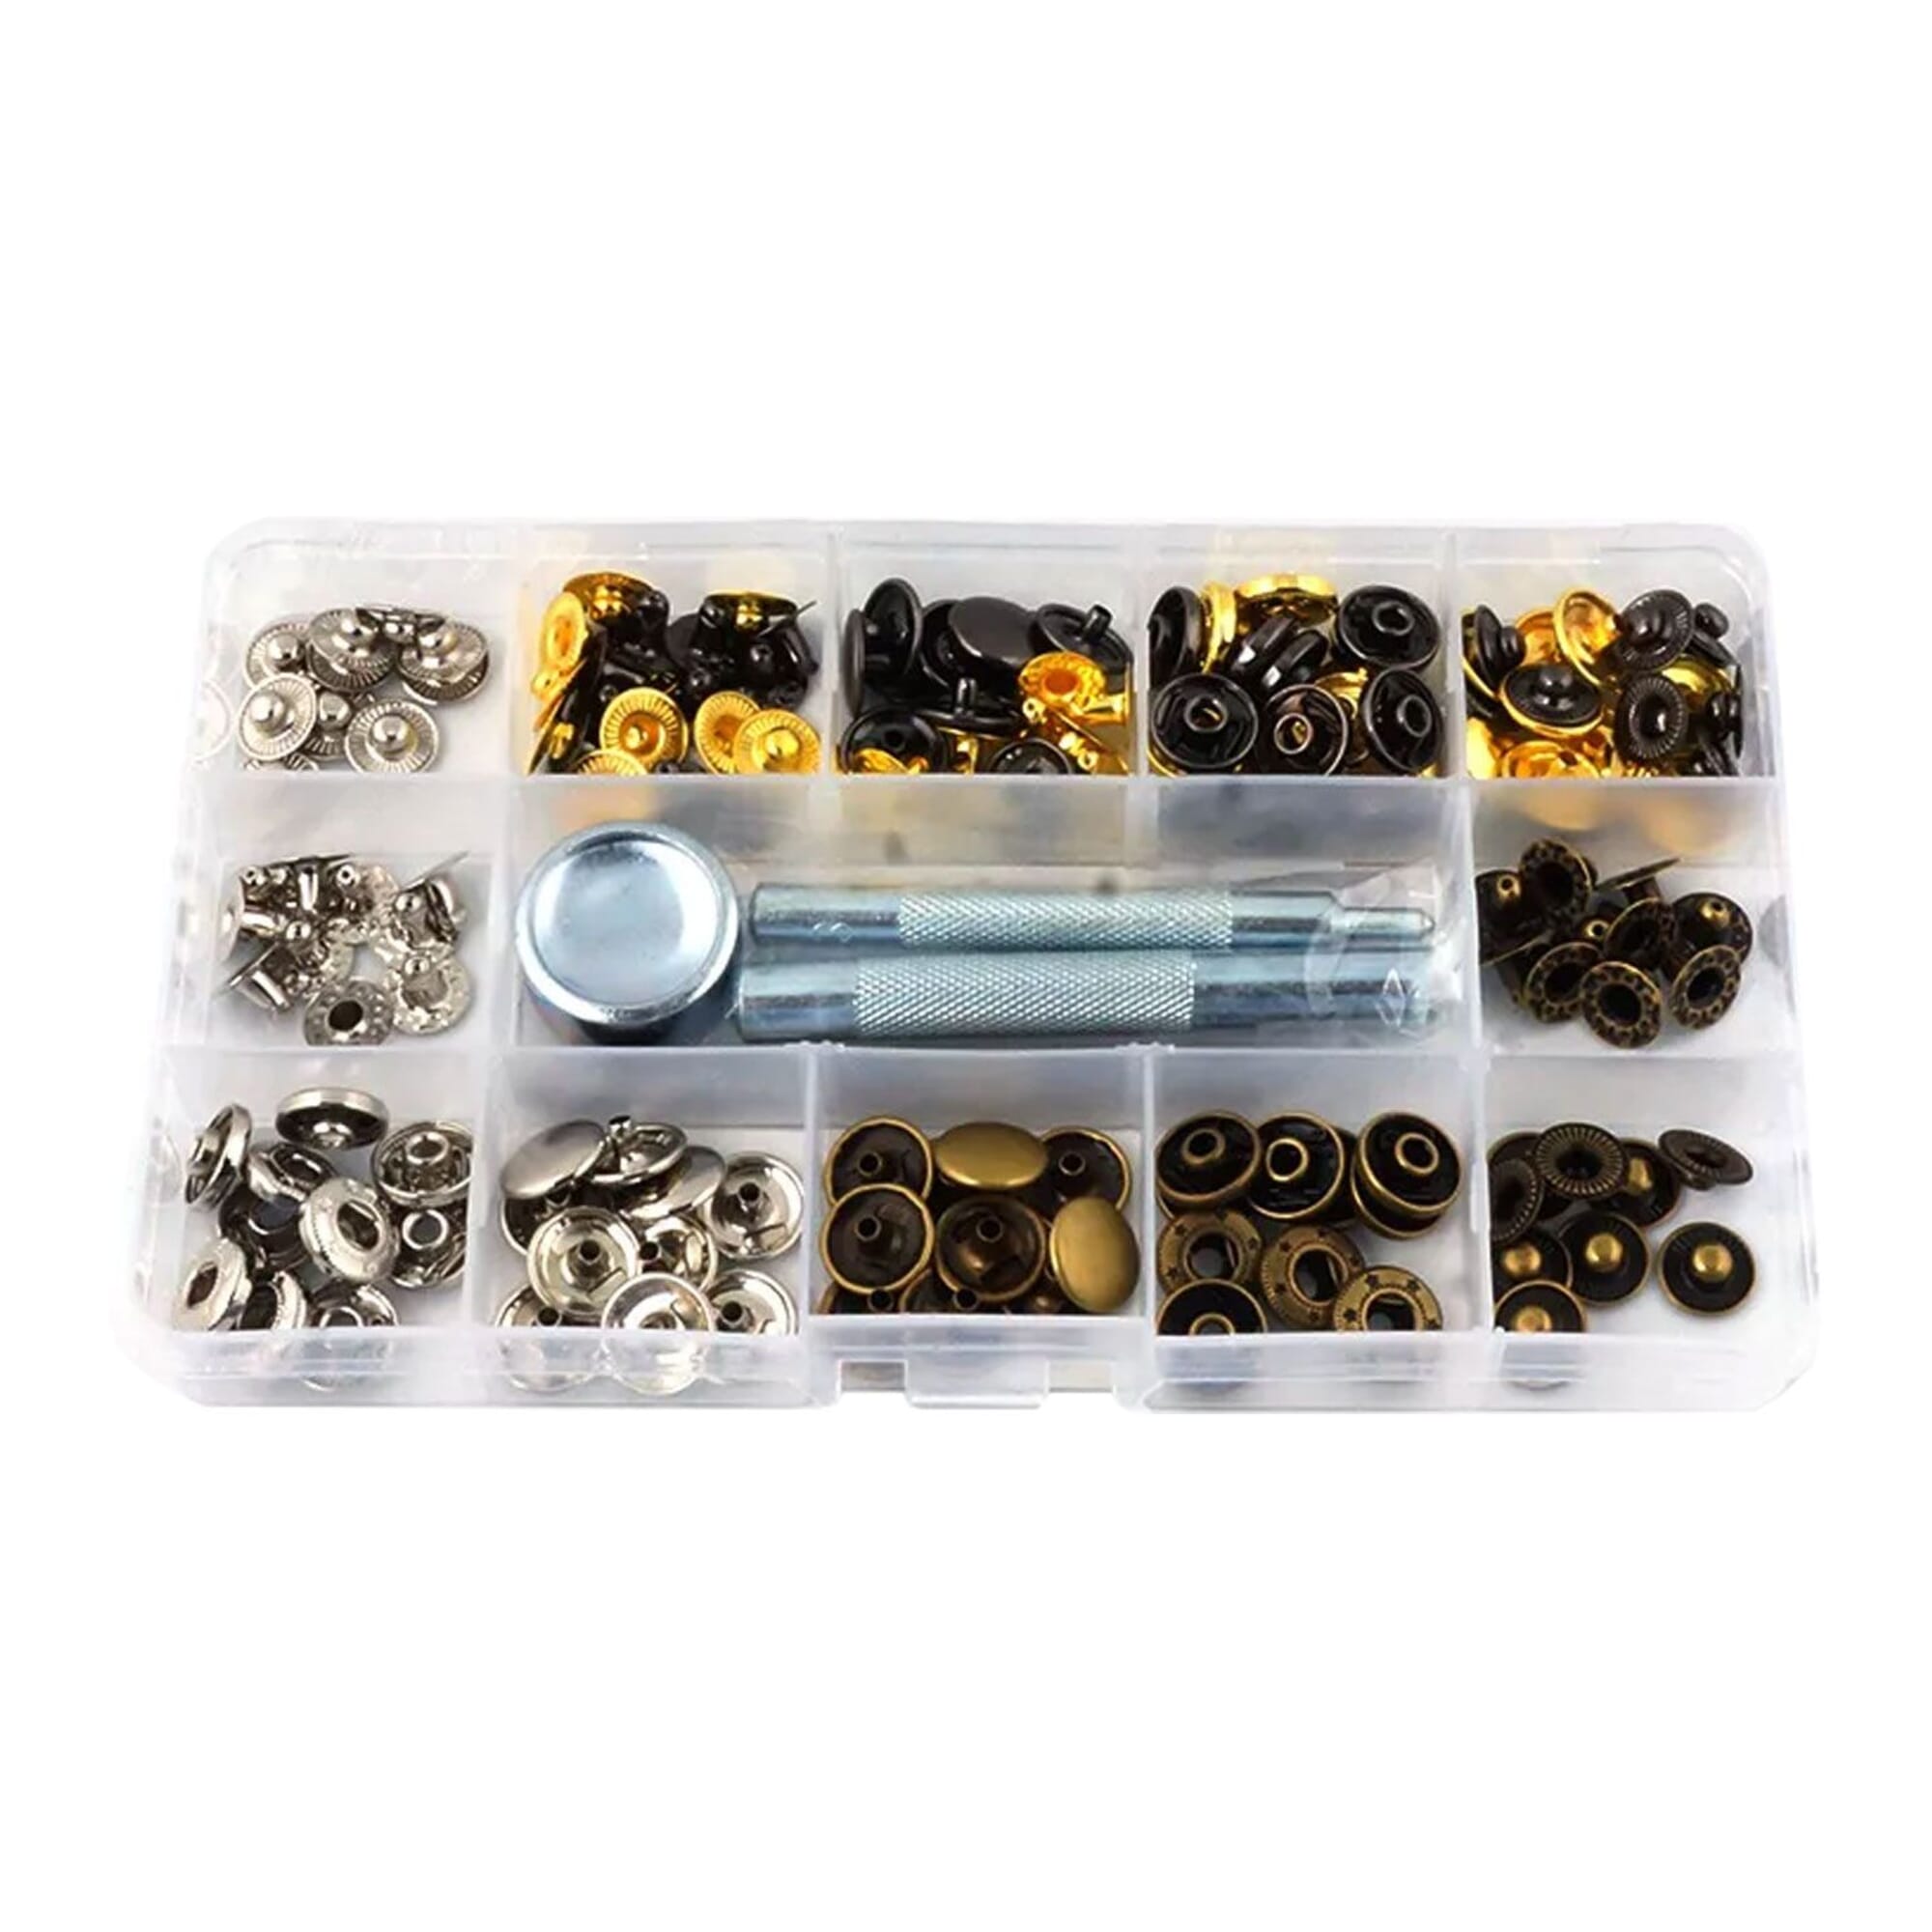 40 Sets Heavy Duty Leather Snap Fasteners Kit, 12.5mm Metal Snap Buttons  Kit Press Studs with 4 Install Tools, Leather Rivets and Snaps for  Clothing